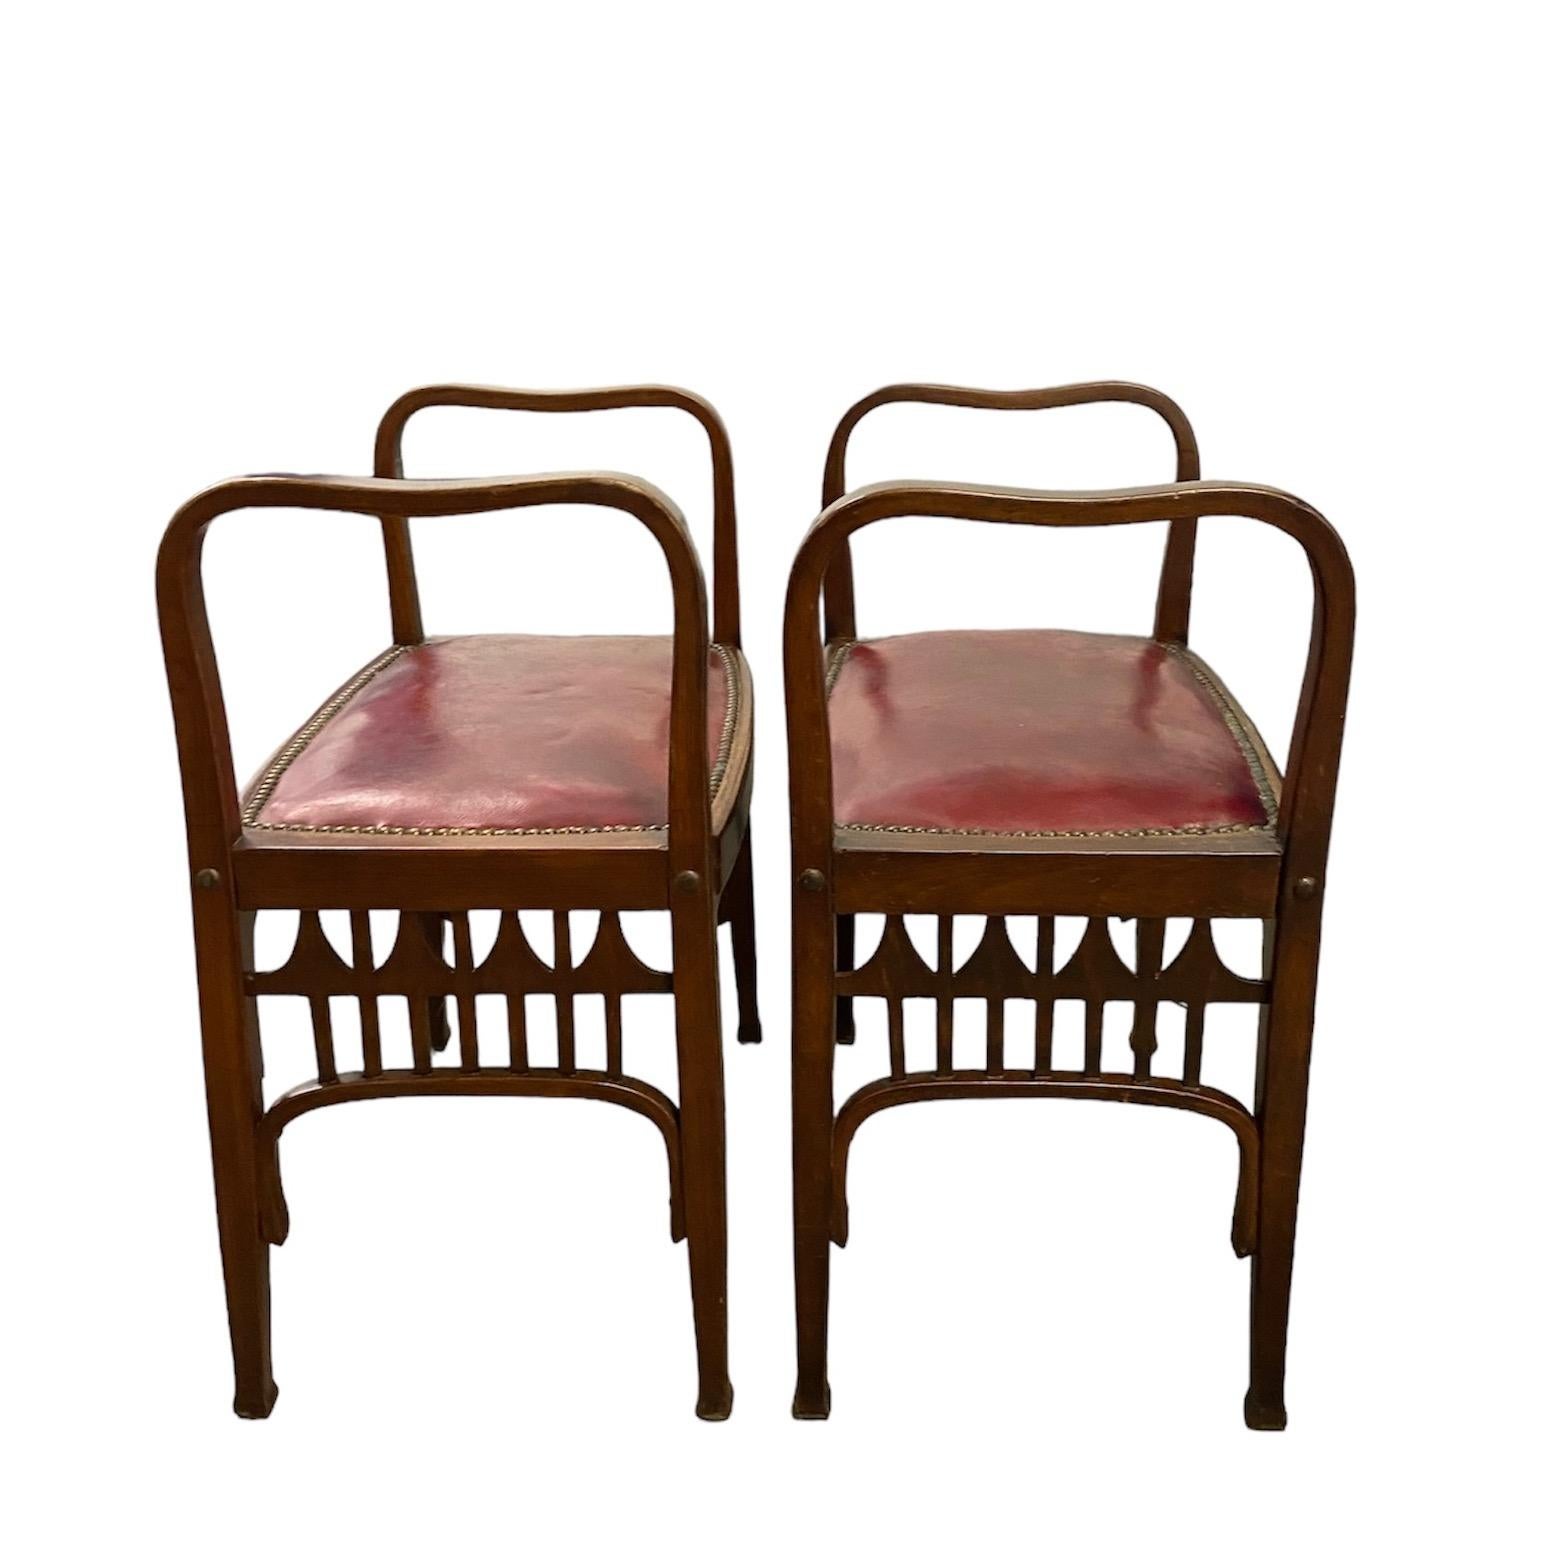 Pair of Austrian Secessionist Bentwood Stools, Benches or Causeuses, early 20thC For Sale 2